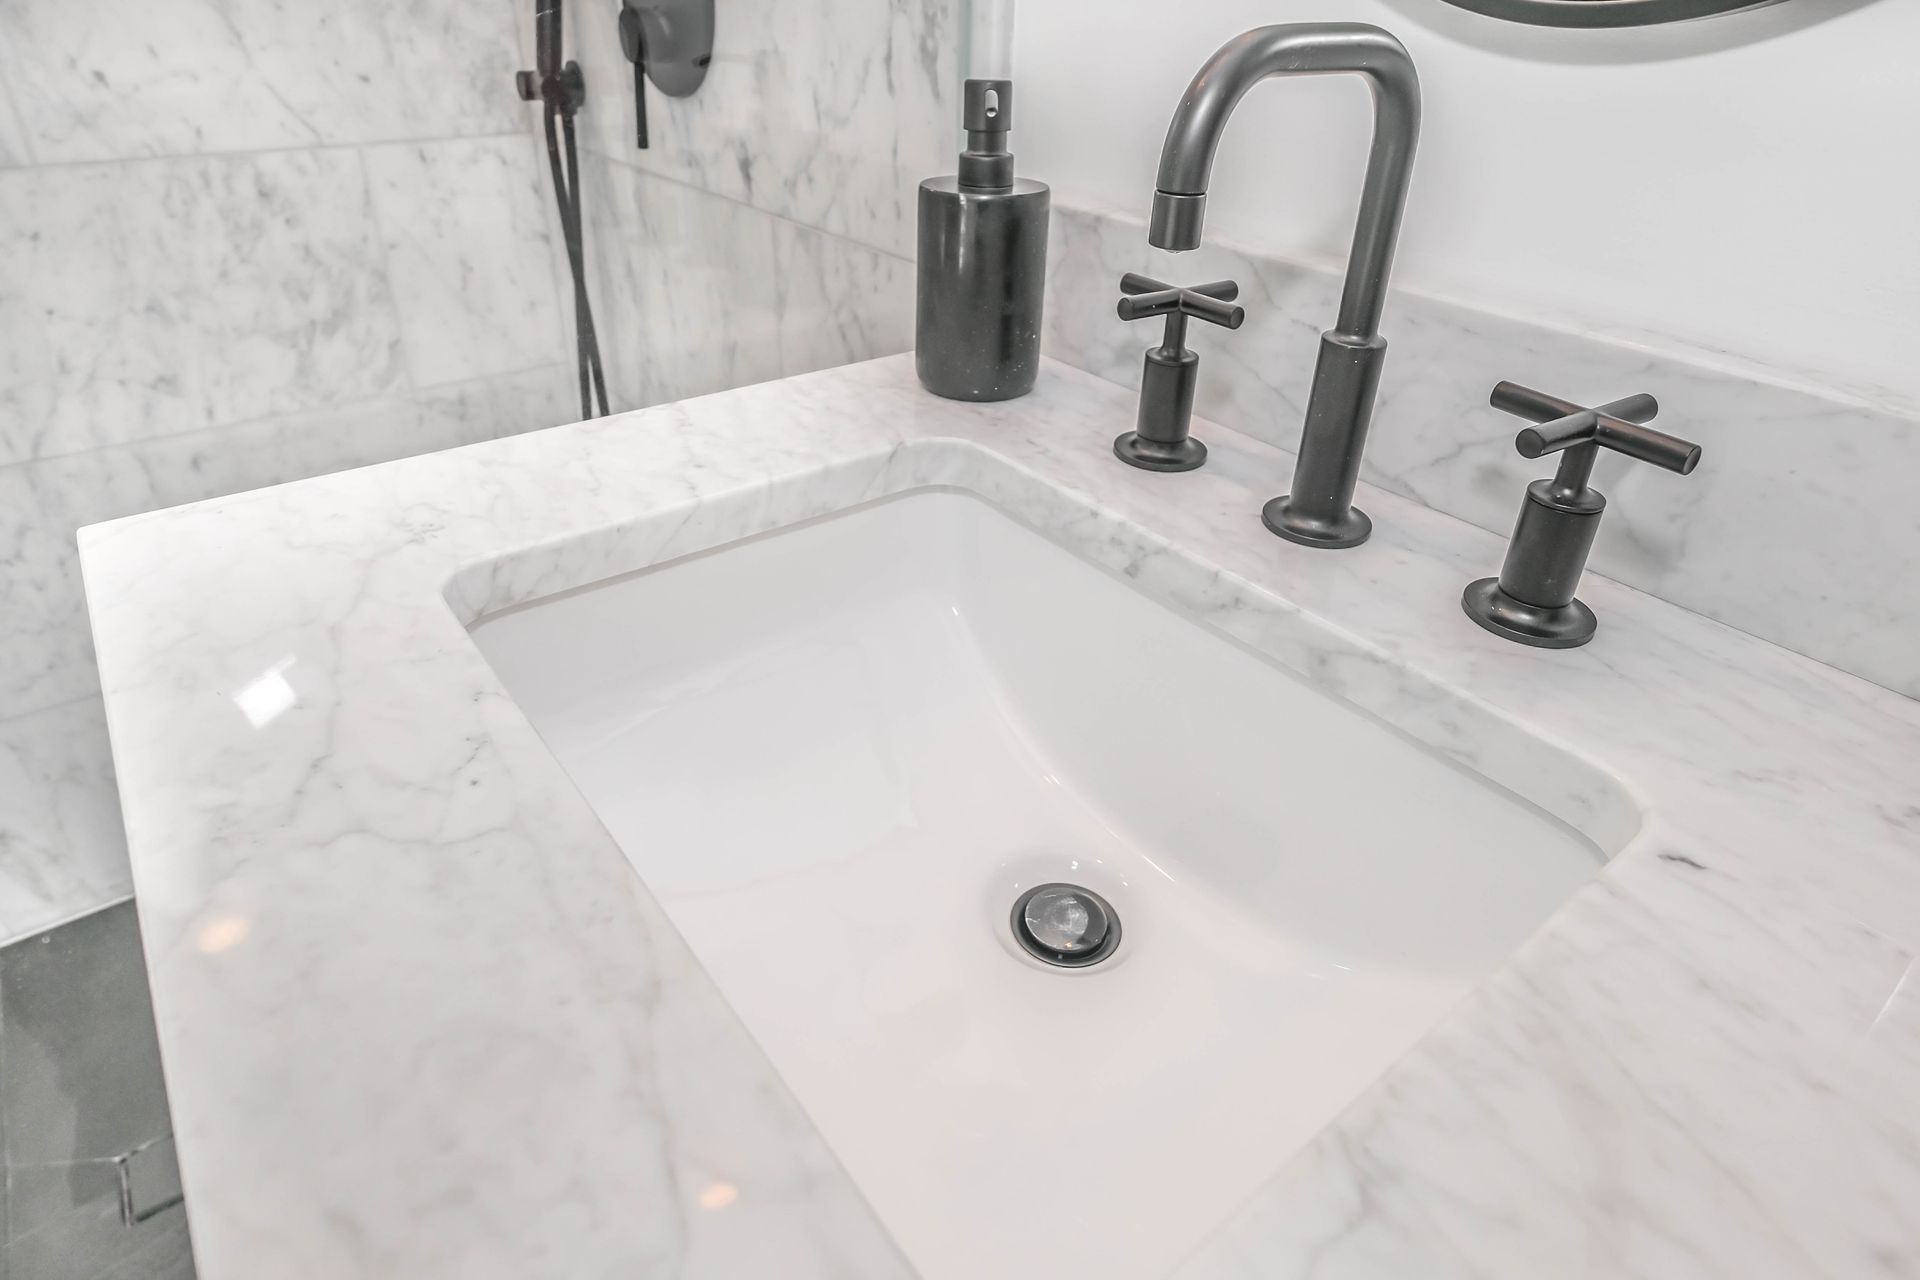 Ceramic sink with a sleek gray stainless steel faucet.